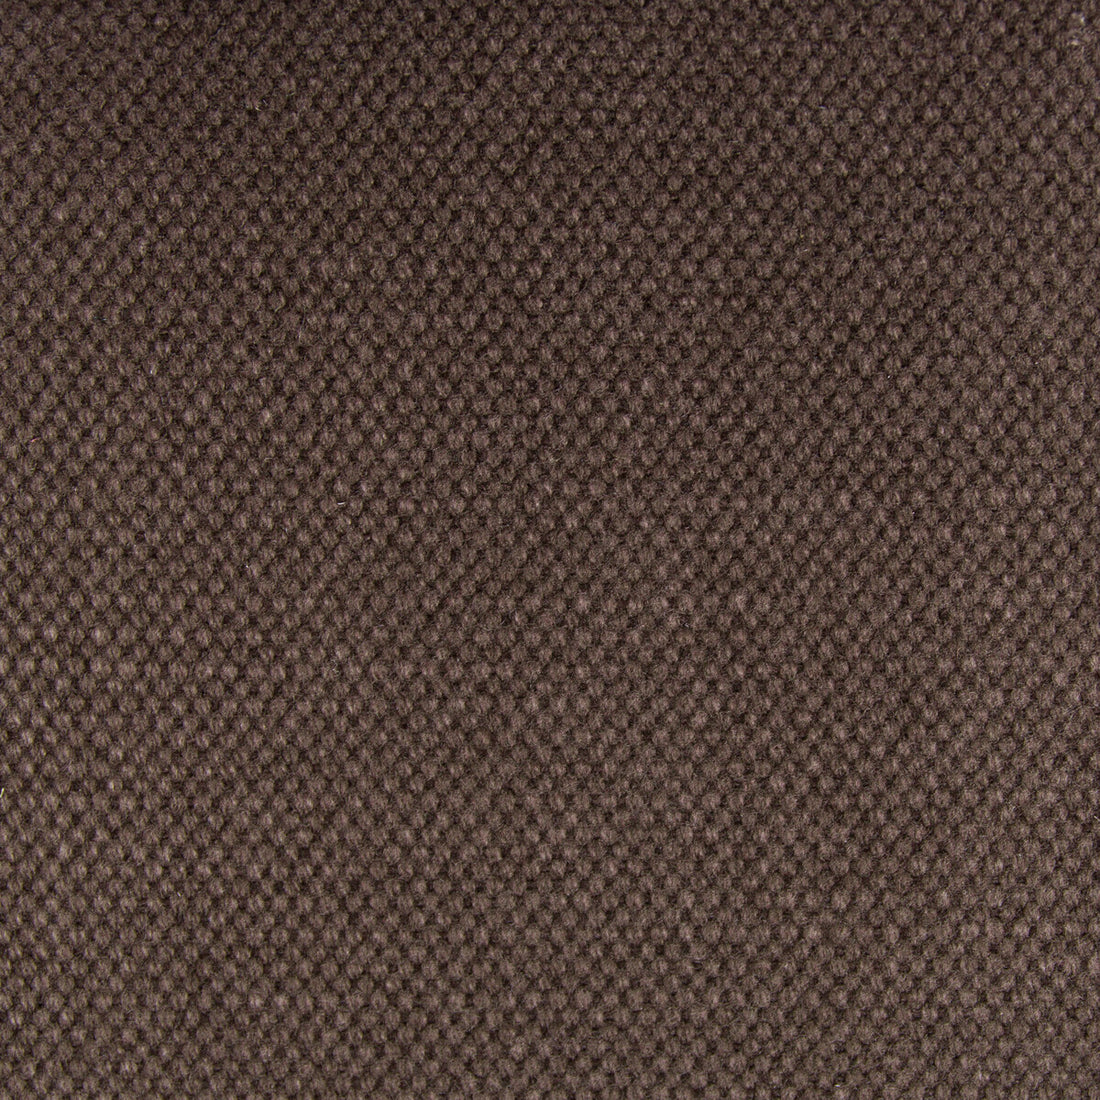 Lima fabric in chocolate color - pattern GDT5616.040.0 - by Gaston y Daniela in the Gaston Nuevo Mundo collection